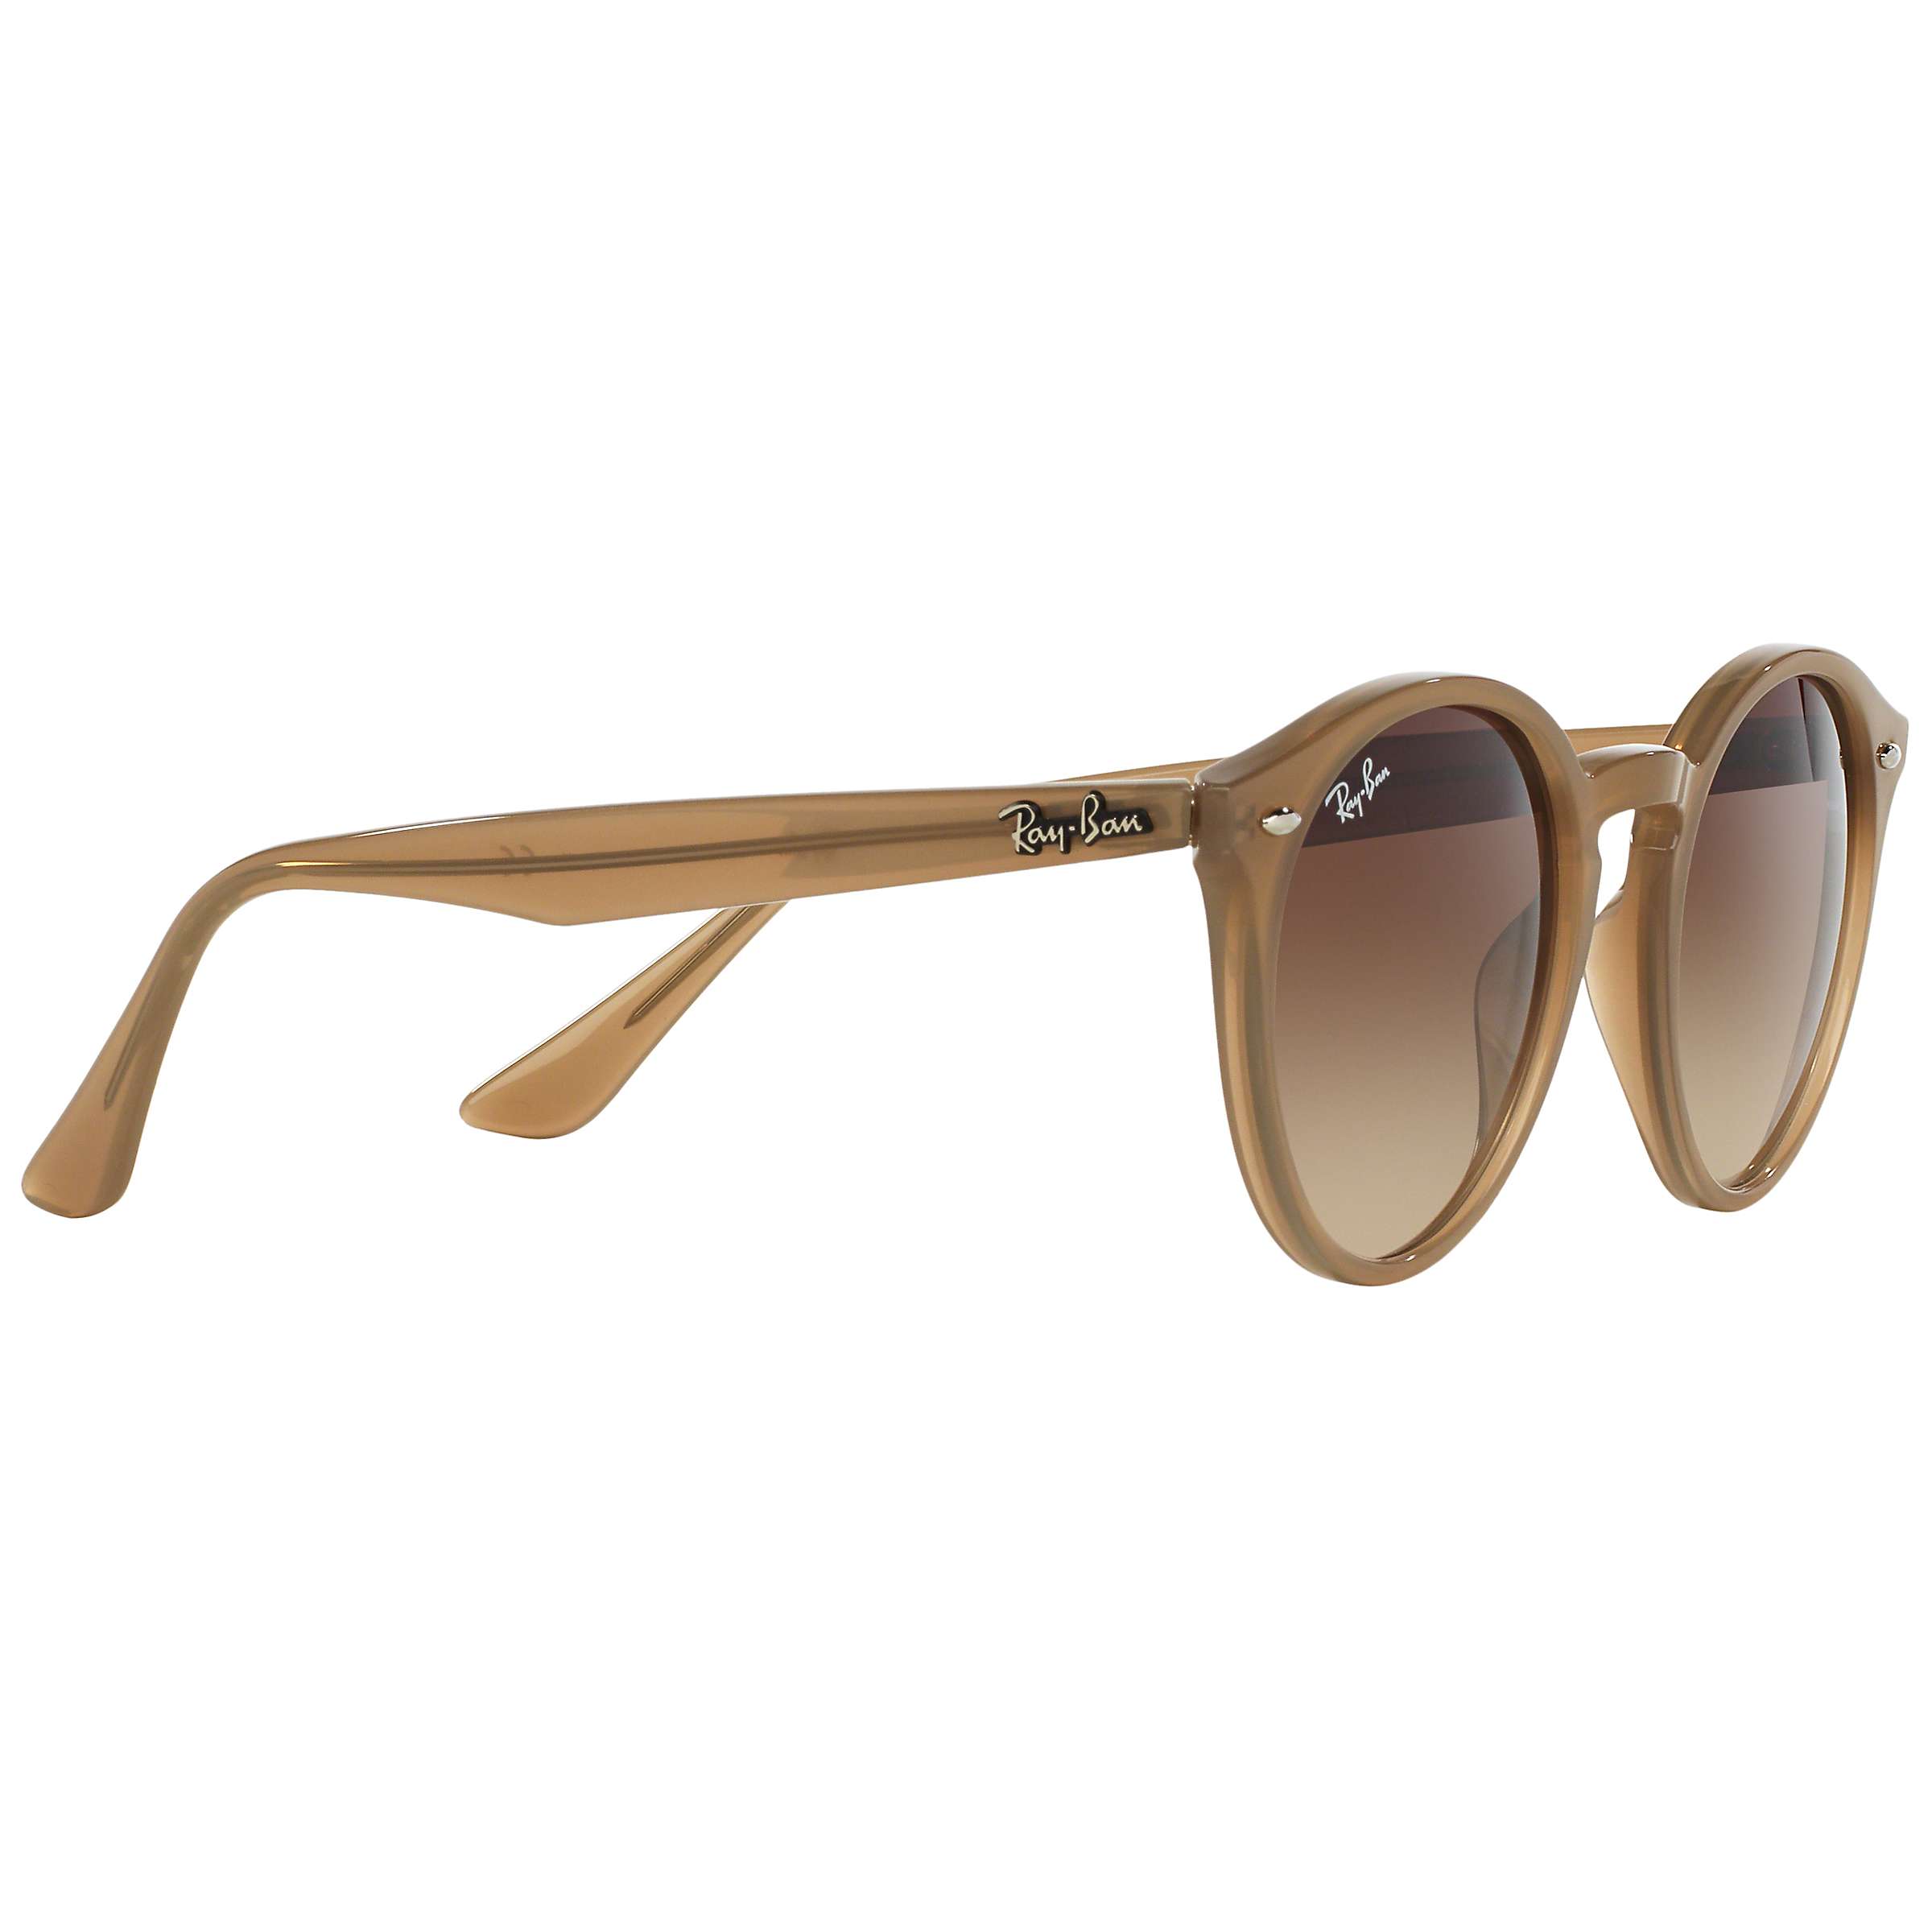 Buy Ray-Ban RB2180 Round Framed Sunglasses Online at johnlewis.com